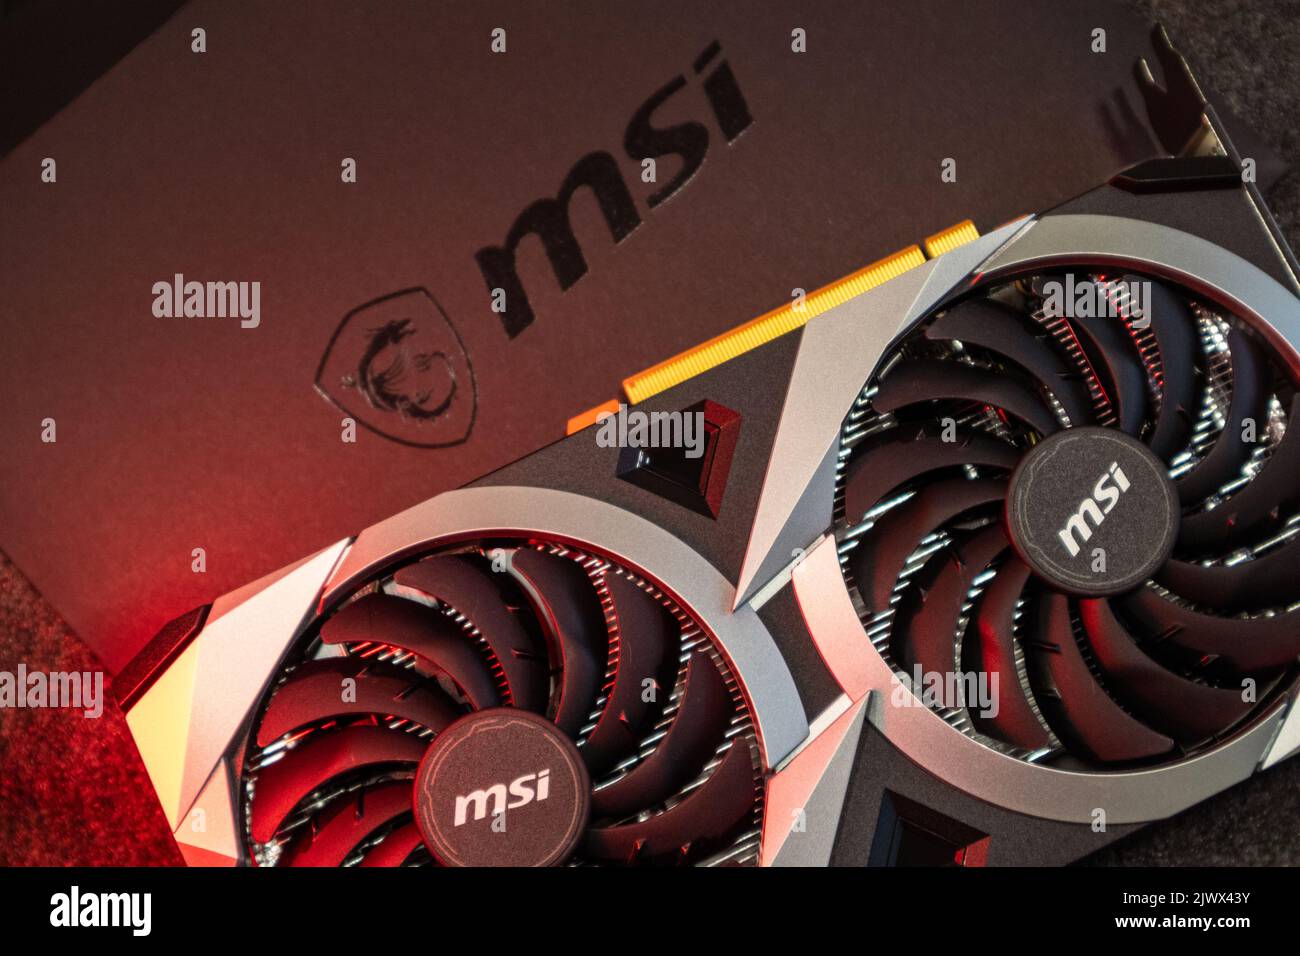 Kyiv, Ukraine - August 19, 2022: MSI MECH 2X graphics video card with AMD  Radeon RX6700XT chipset in red light, close-up top view Stock Photo - Alamy